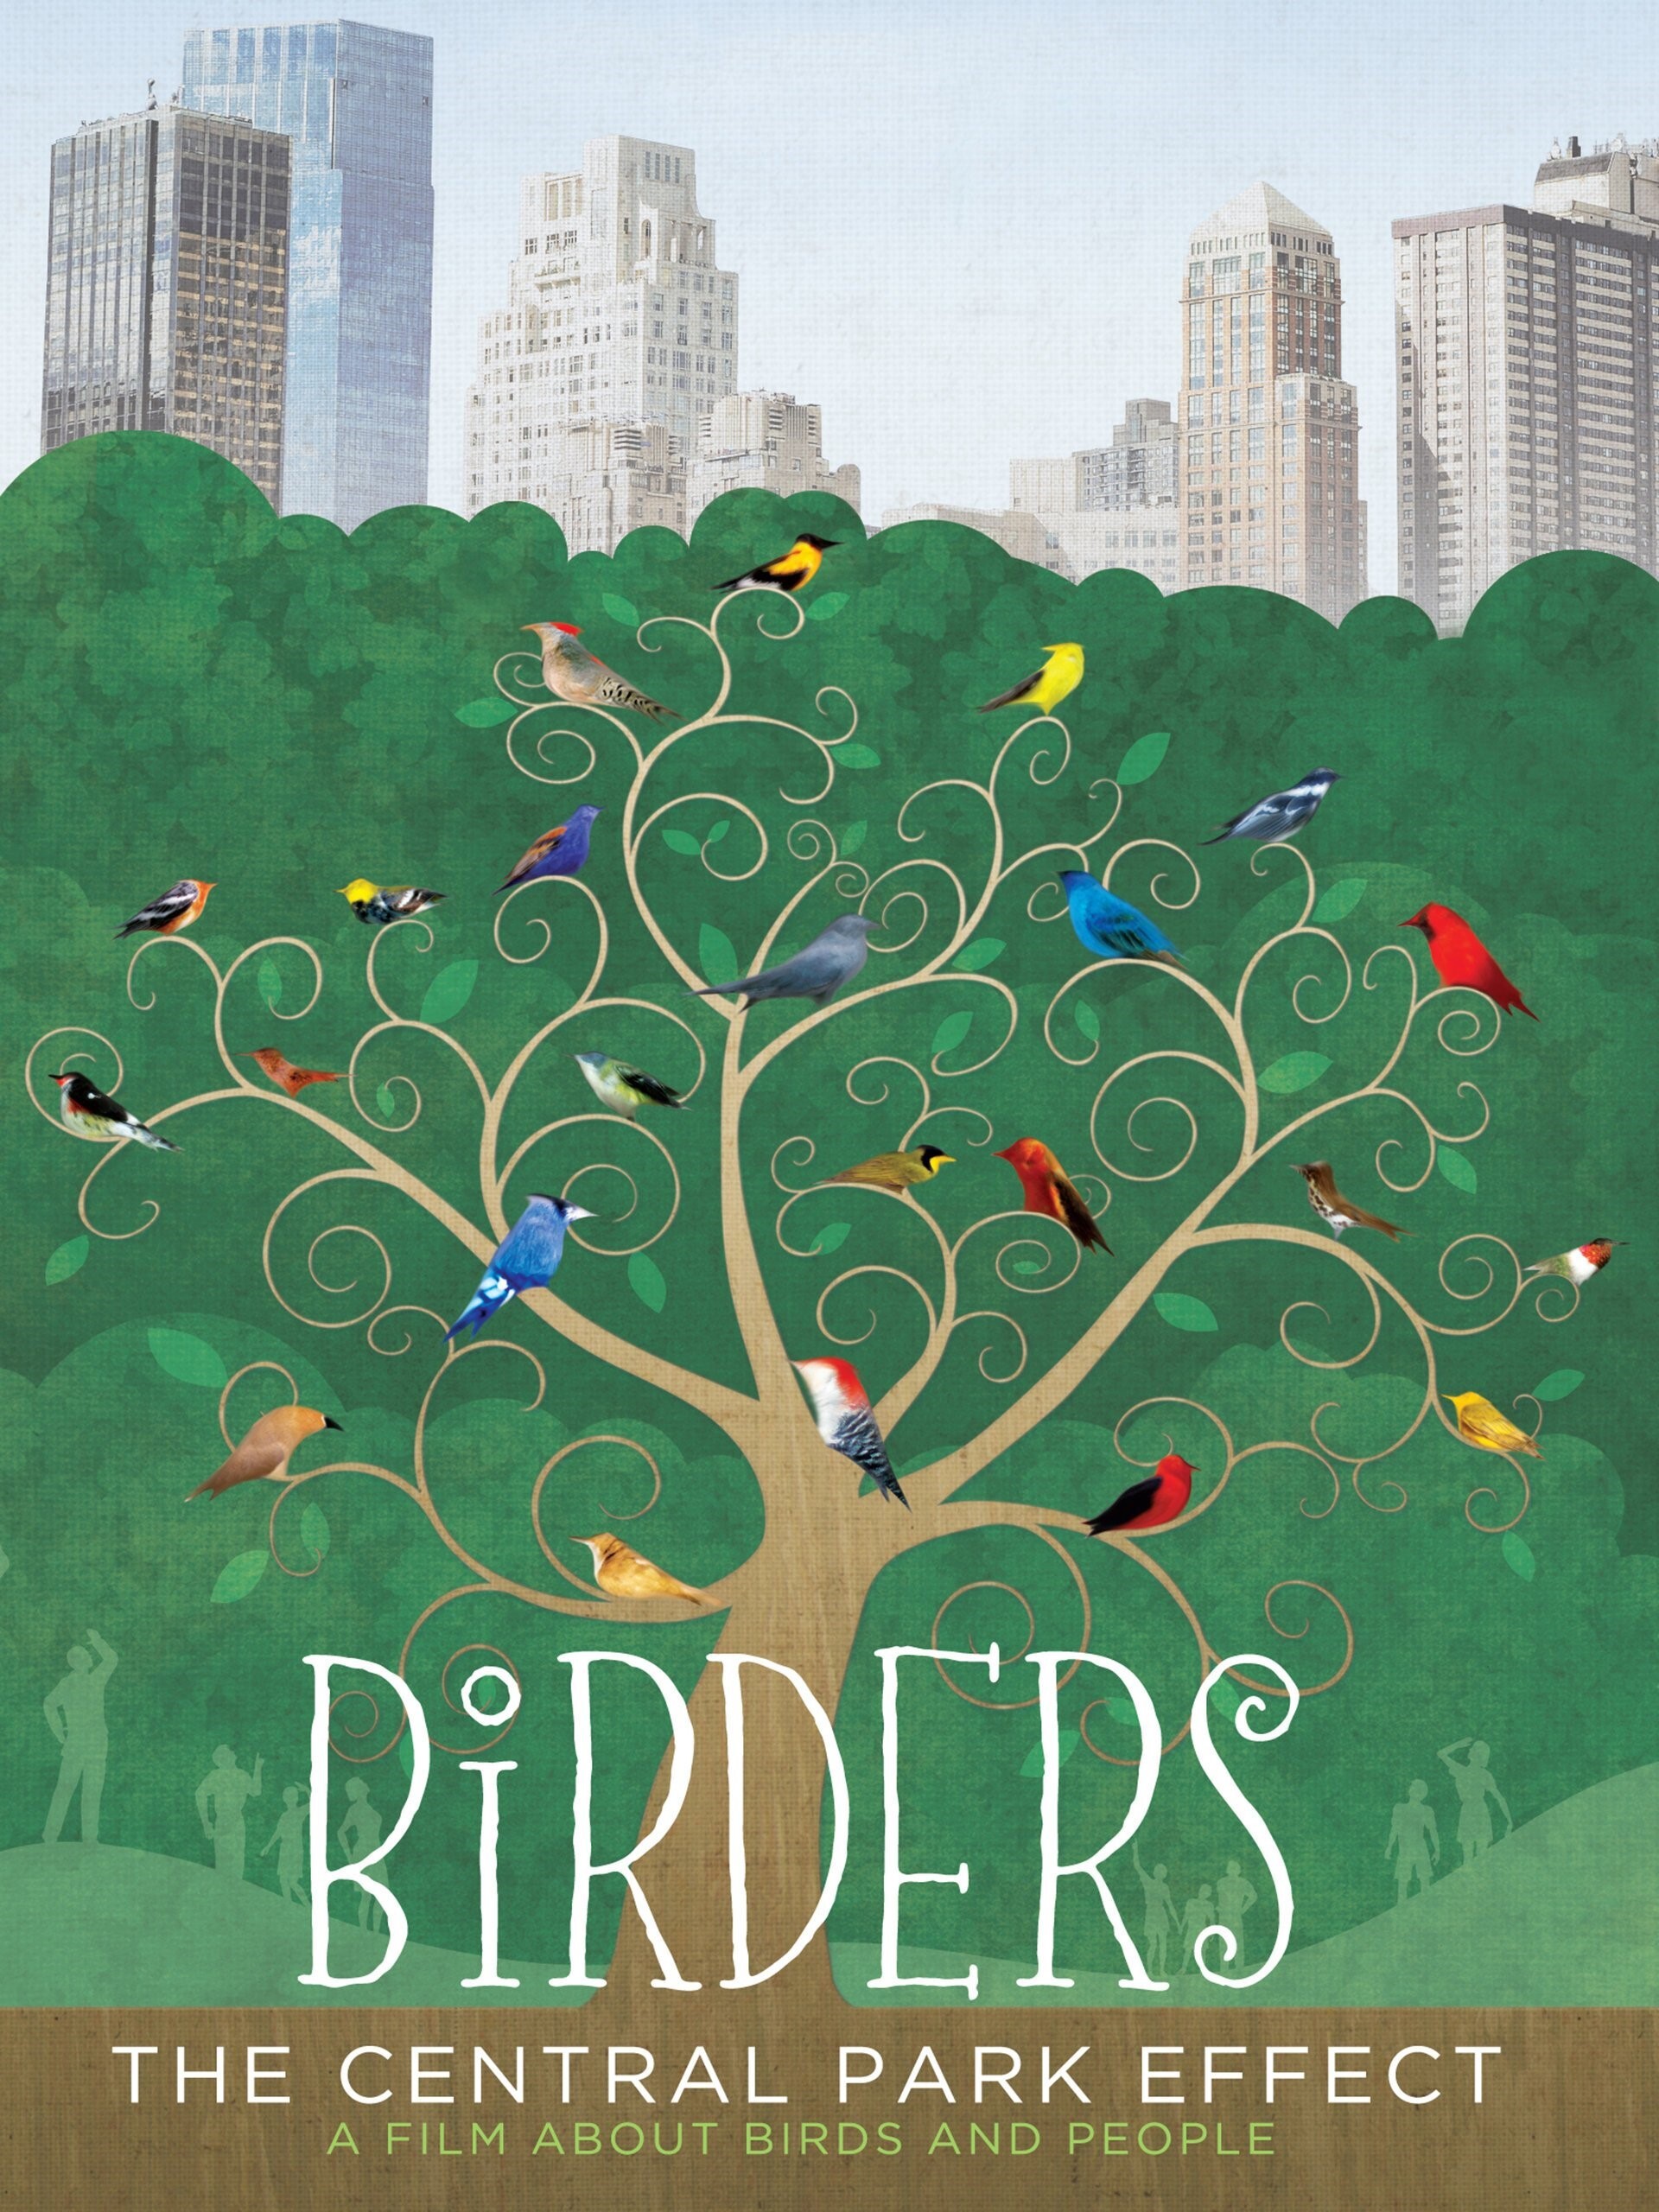 Birders: The Central Park Effect. Produced by Jeffrey Kimball